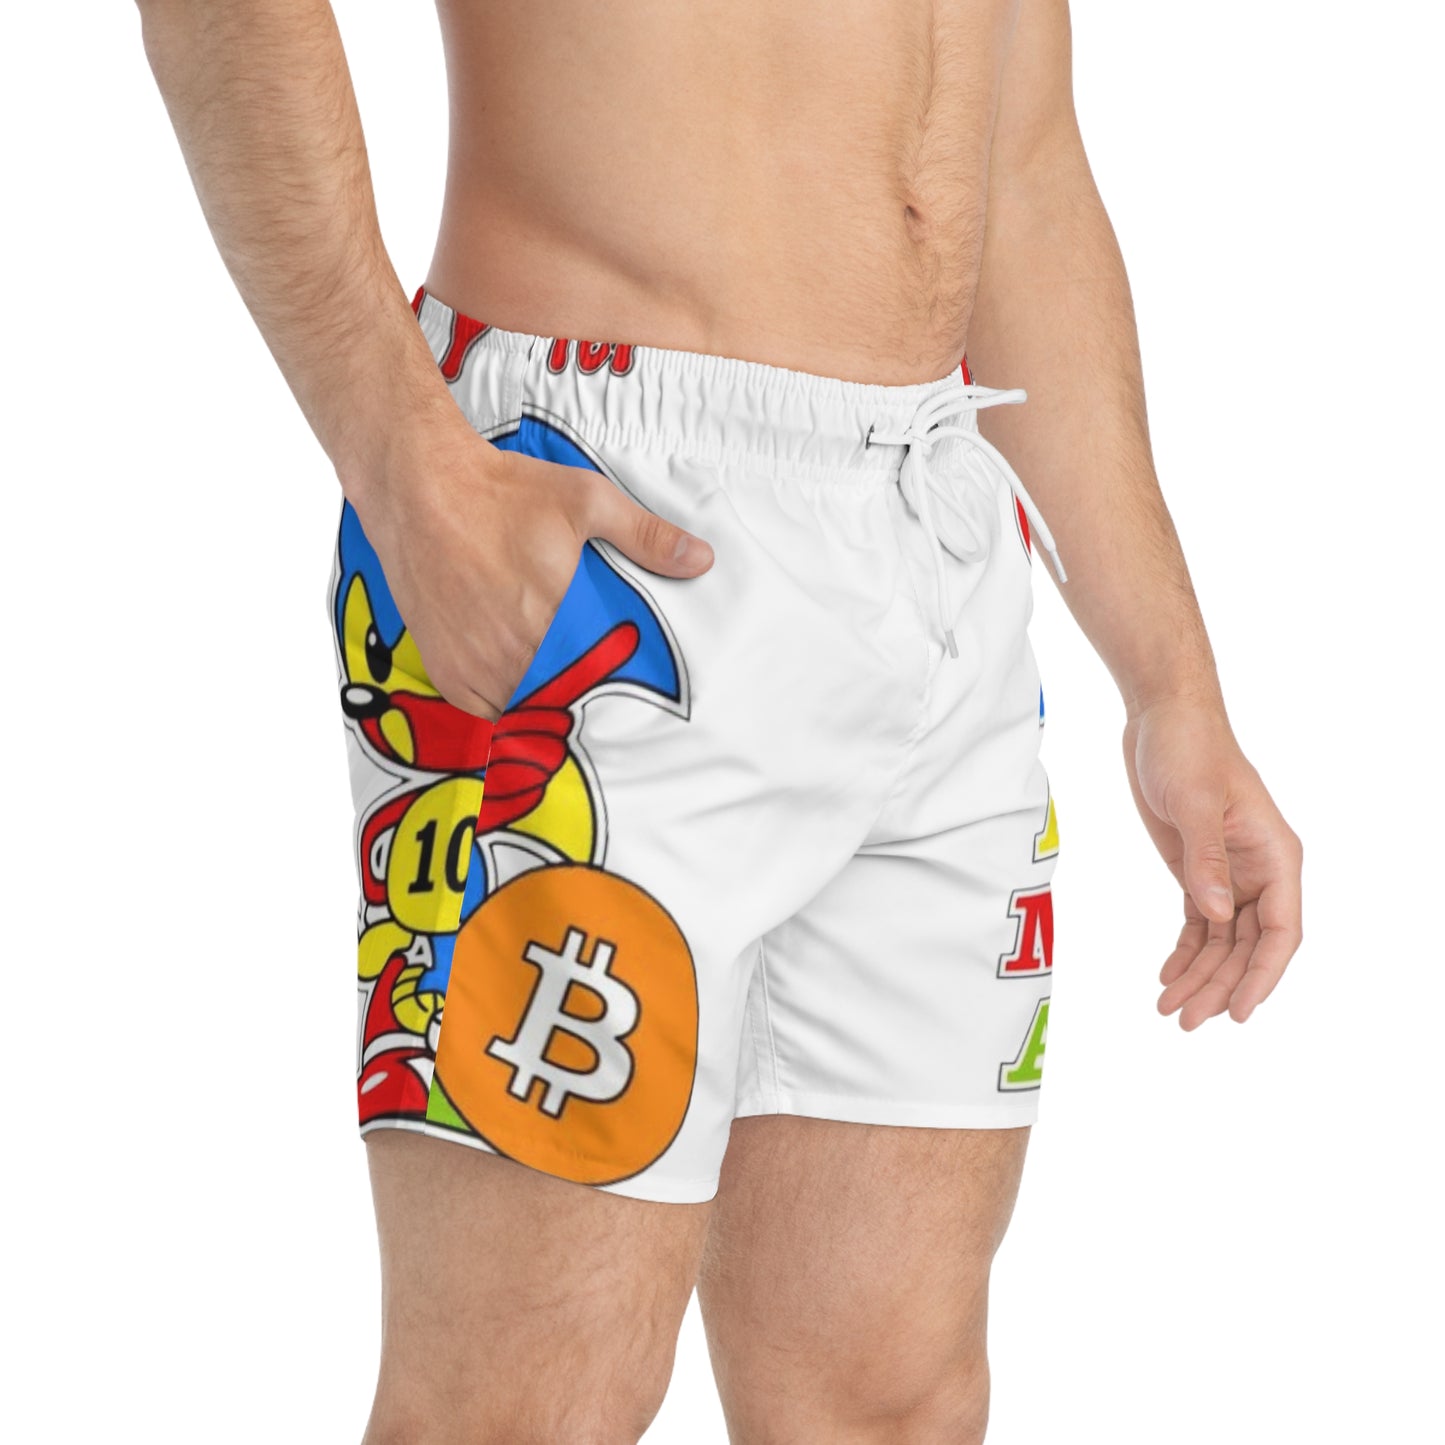 Limited Edition HPOS10I Swimming Trunks